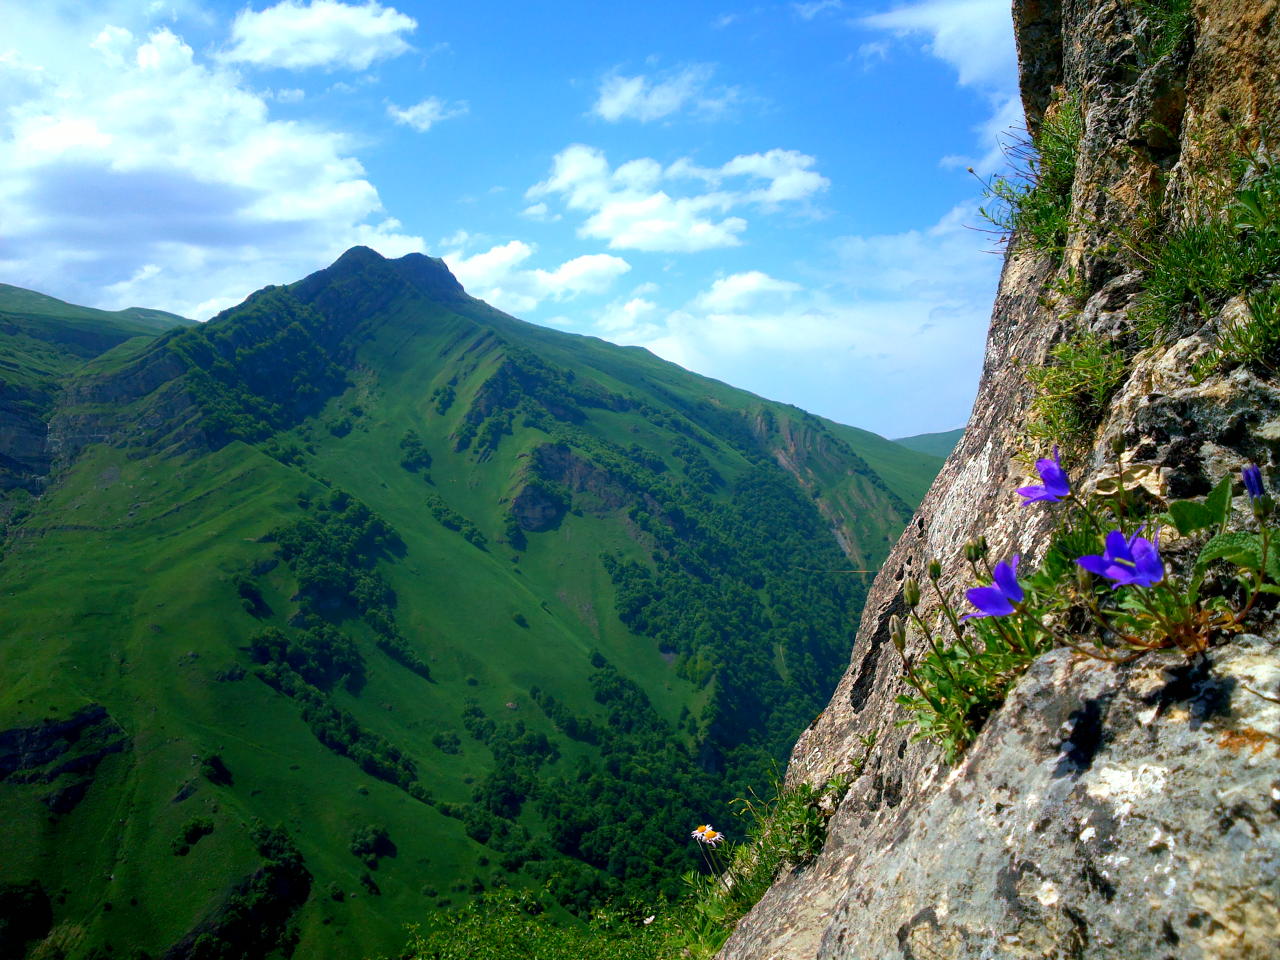 Azerbaijan, country attracting tourists with fascinating national parks